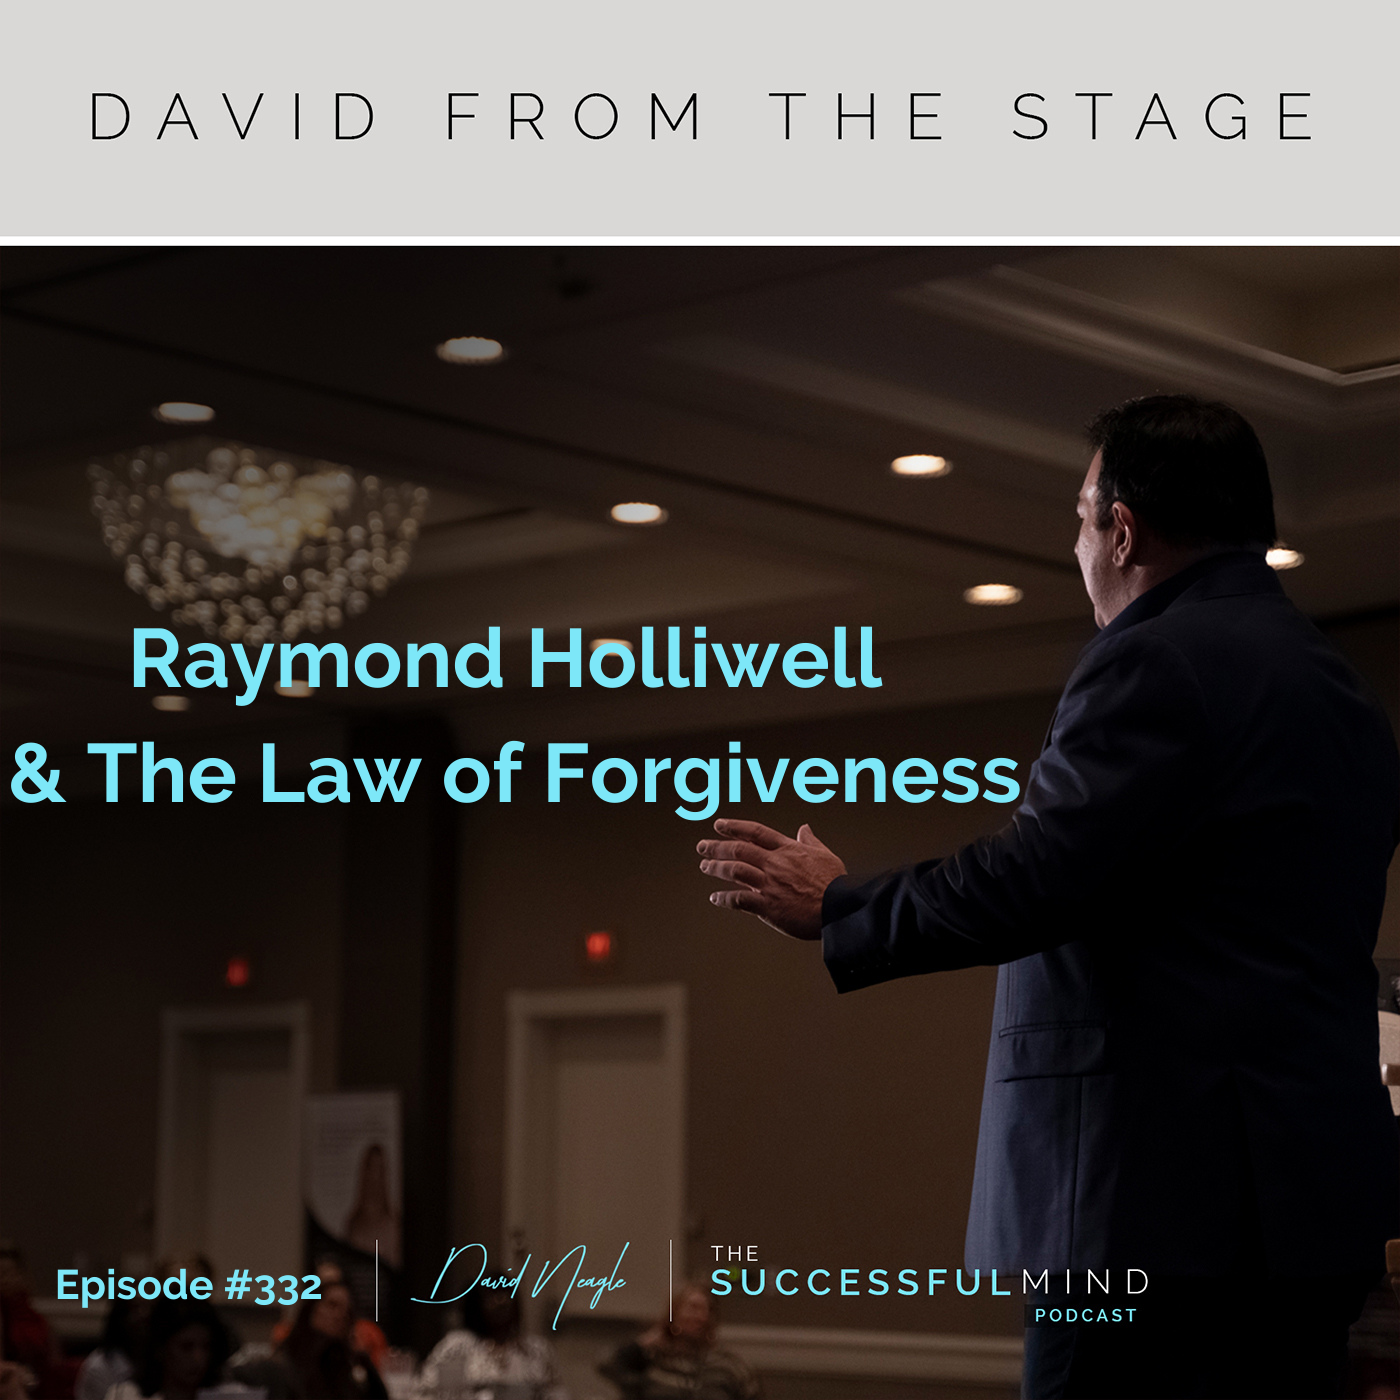 The Successful Mind Podcast - Episode 331 - Raymond Holliwell & the Law of Forgiveness